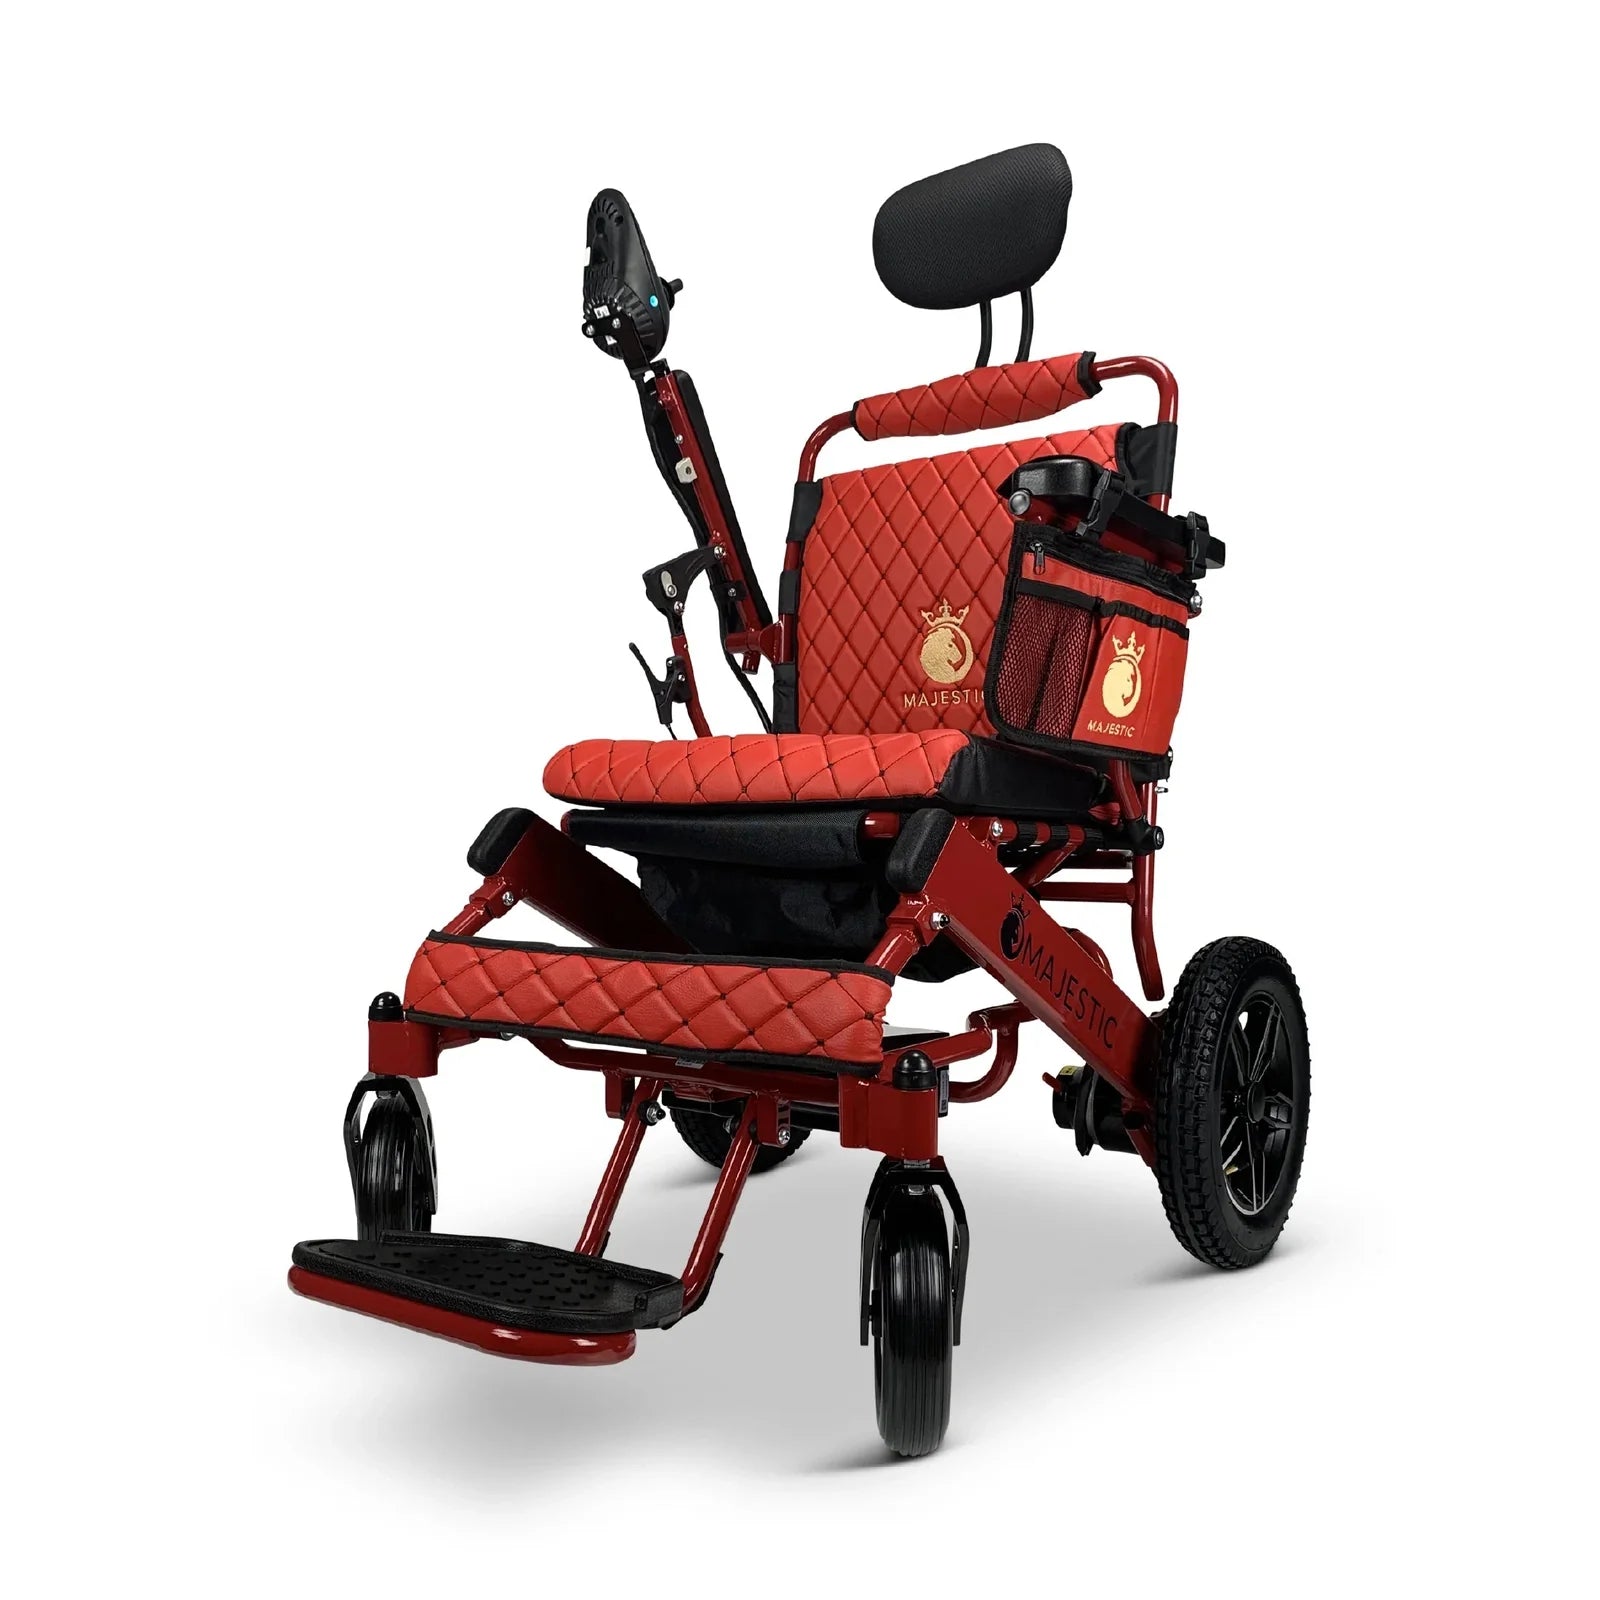 ComfyGO Majestic IQ-8000 Remote Controlled Lightweight Folding Electric Wheelchair Power Wheelchairs ComfyGO Red Red 10 Miles & 20" Seat Width